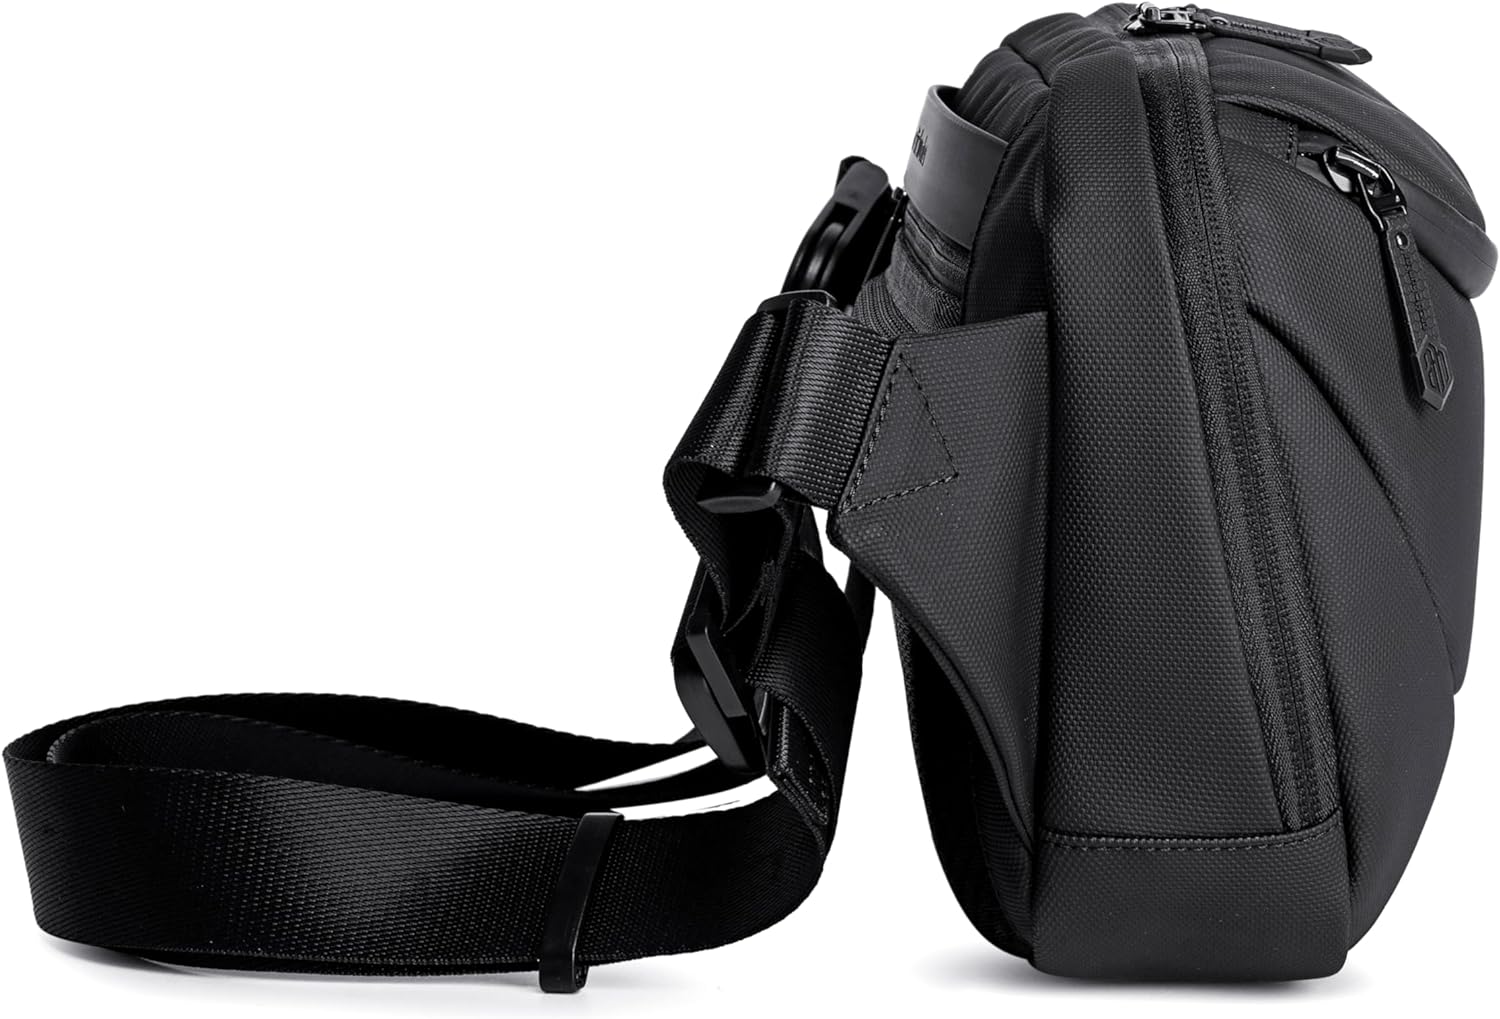 Arctic Hunter Stylish Crossbody Bag Anti-Theft Water Repellent Chest Bag for Men Women on Shopping Travel Office Hiking, Y00561